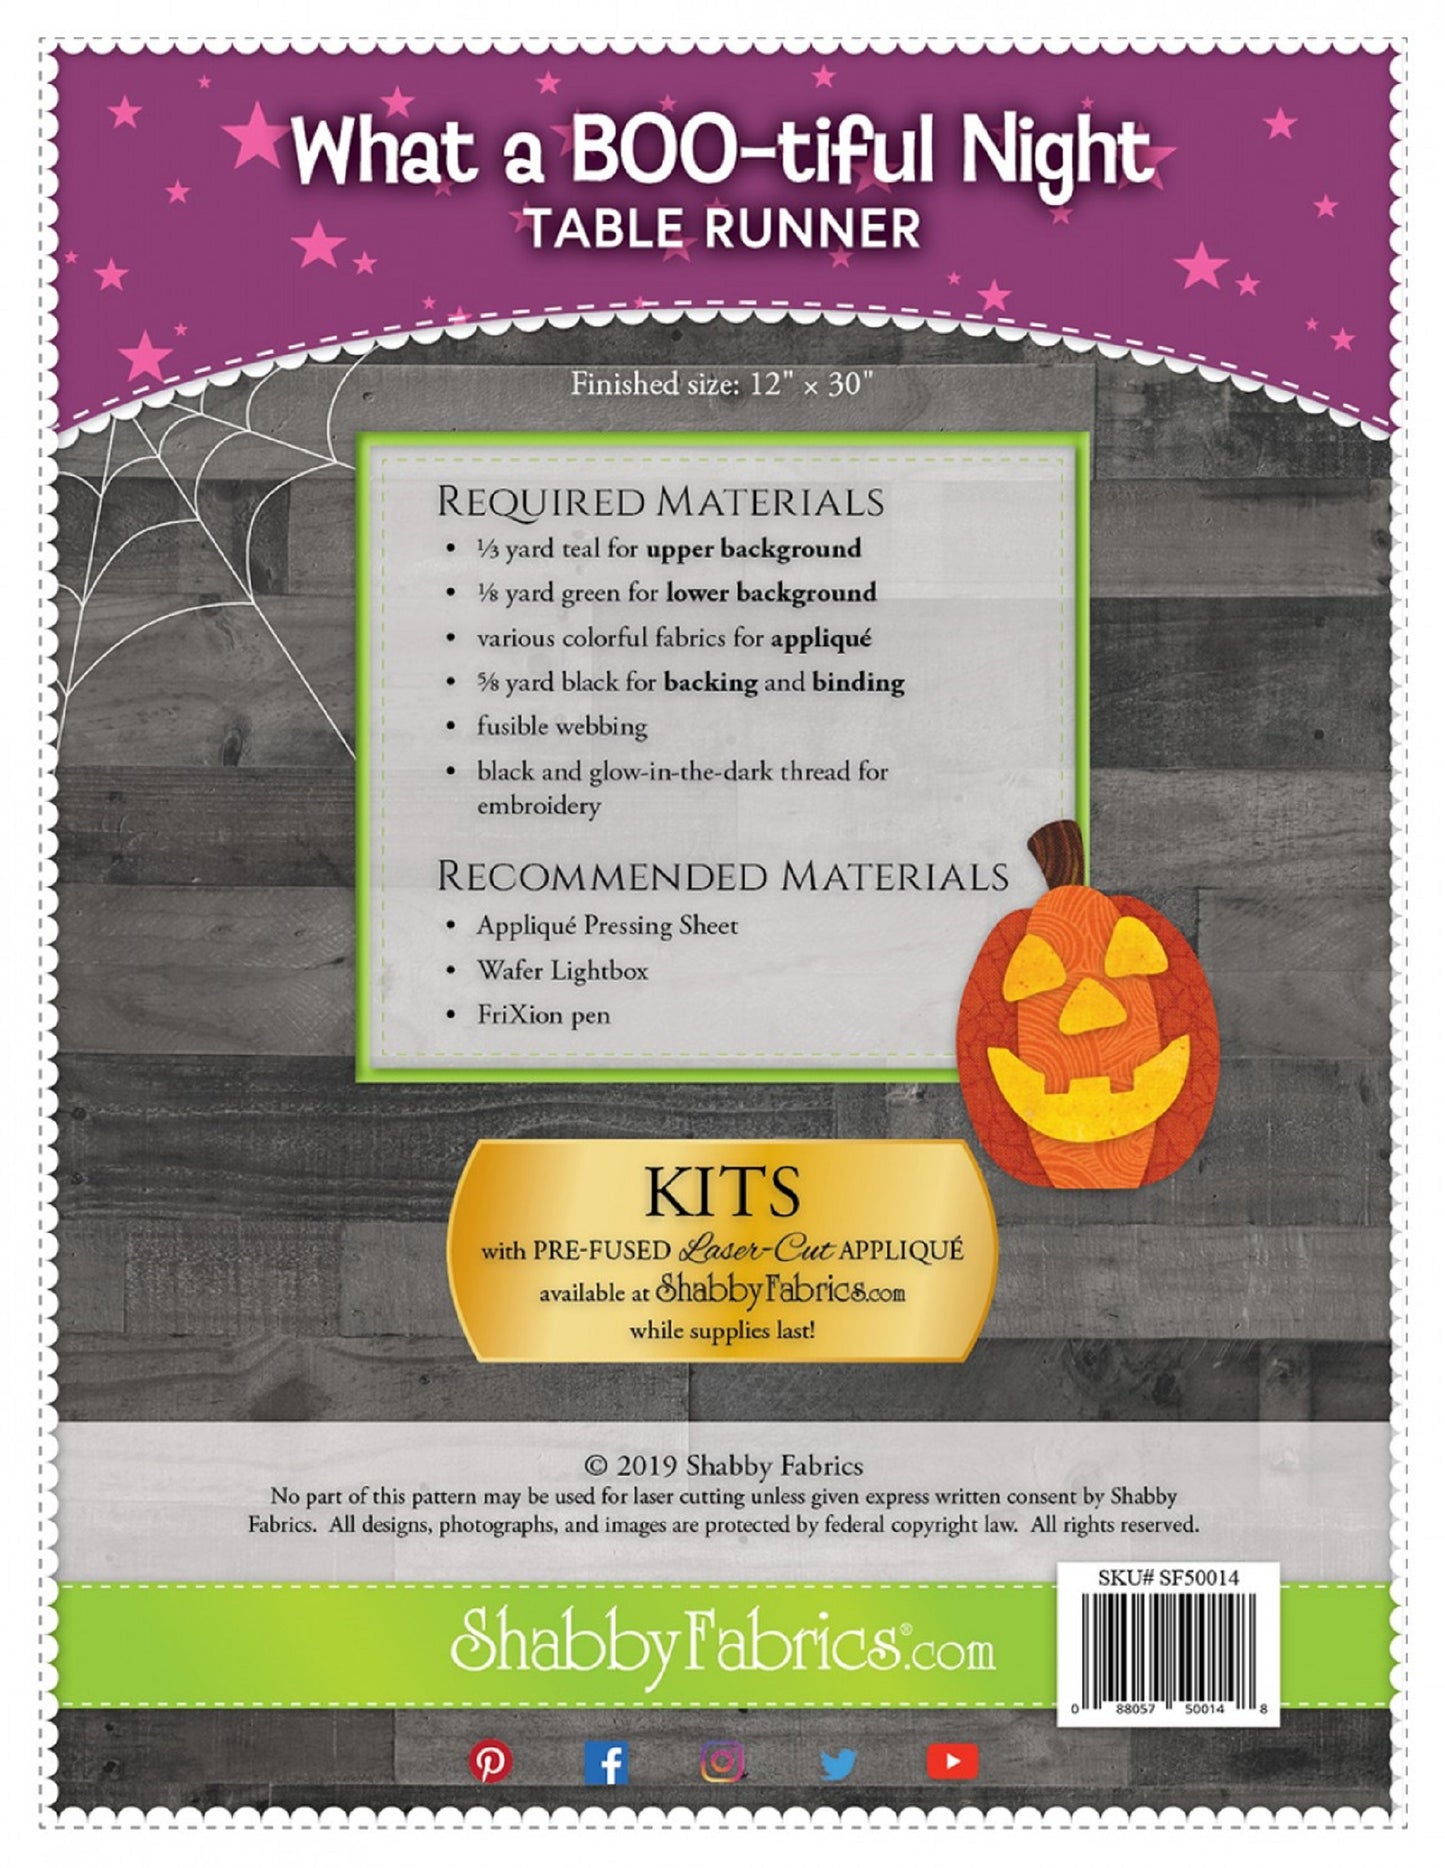 What a BOO-tiful Night Table Runner Pattern by Shabby Fabrics